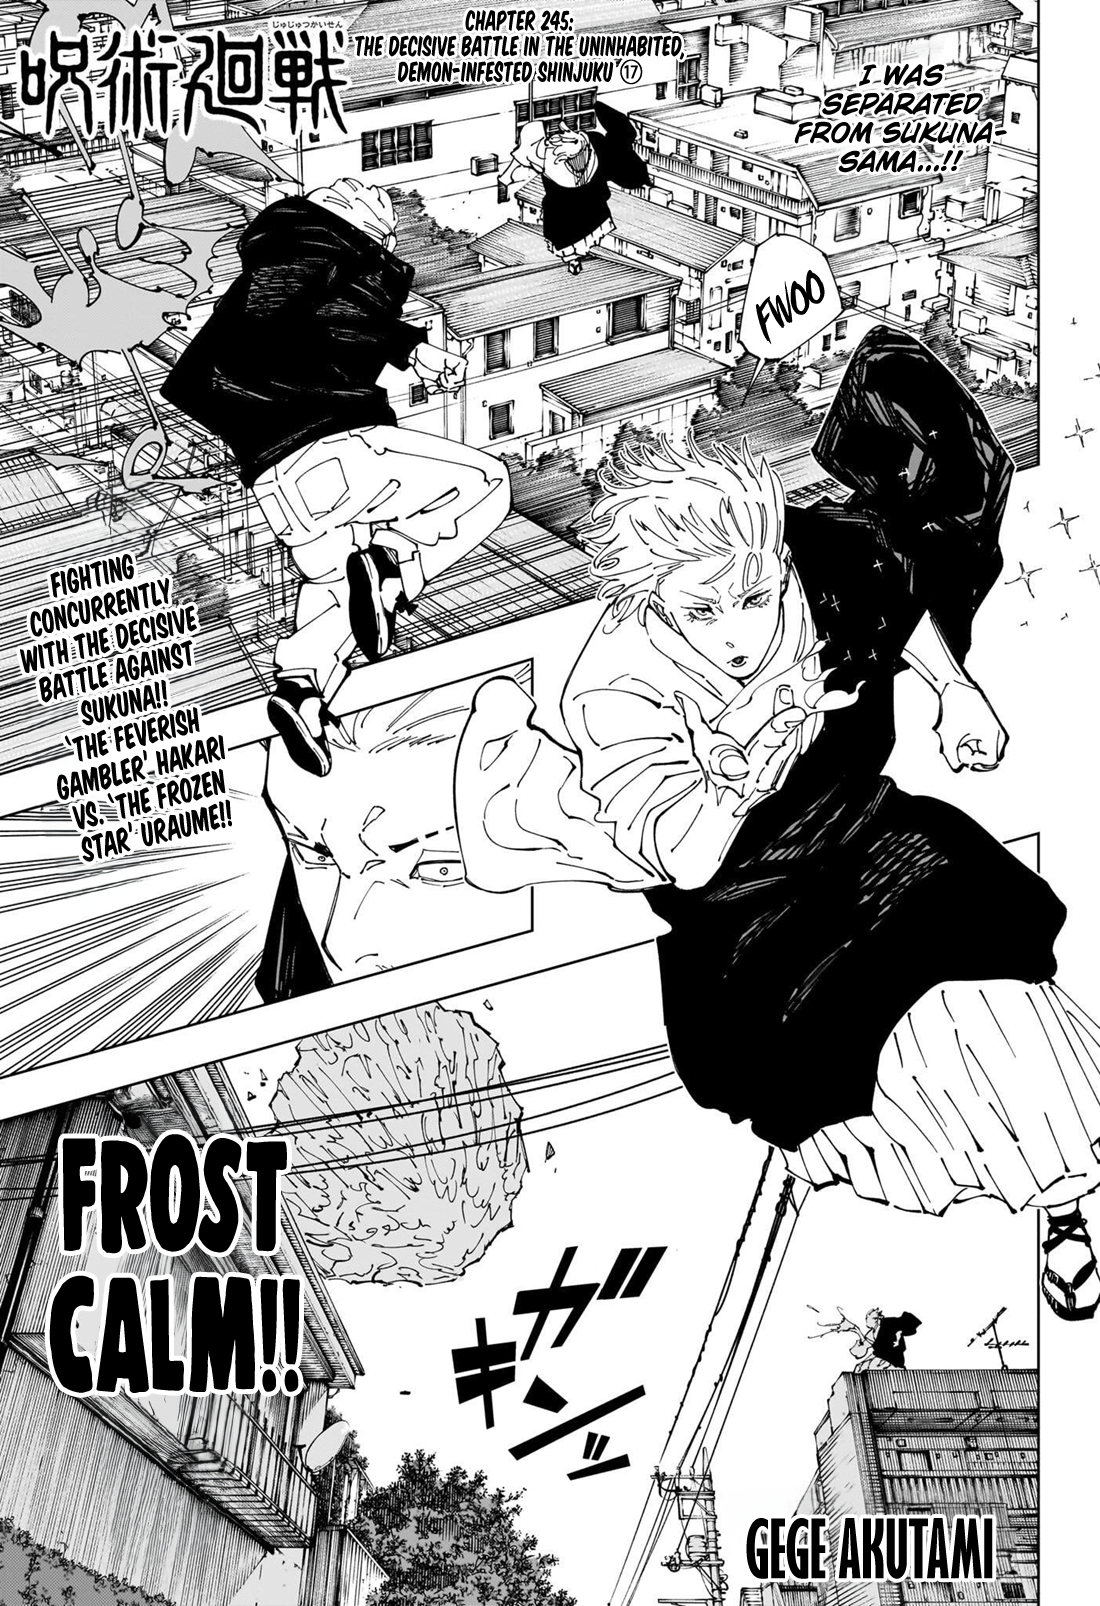 Call of the Night, Chapter 166 - Call of the Night Manga Online